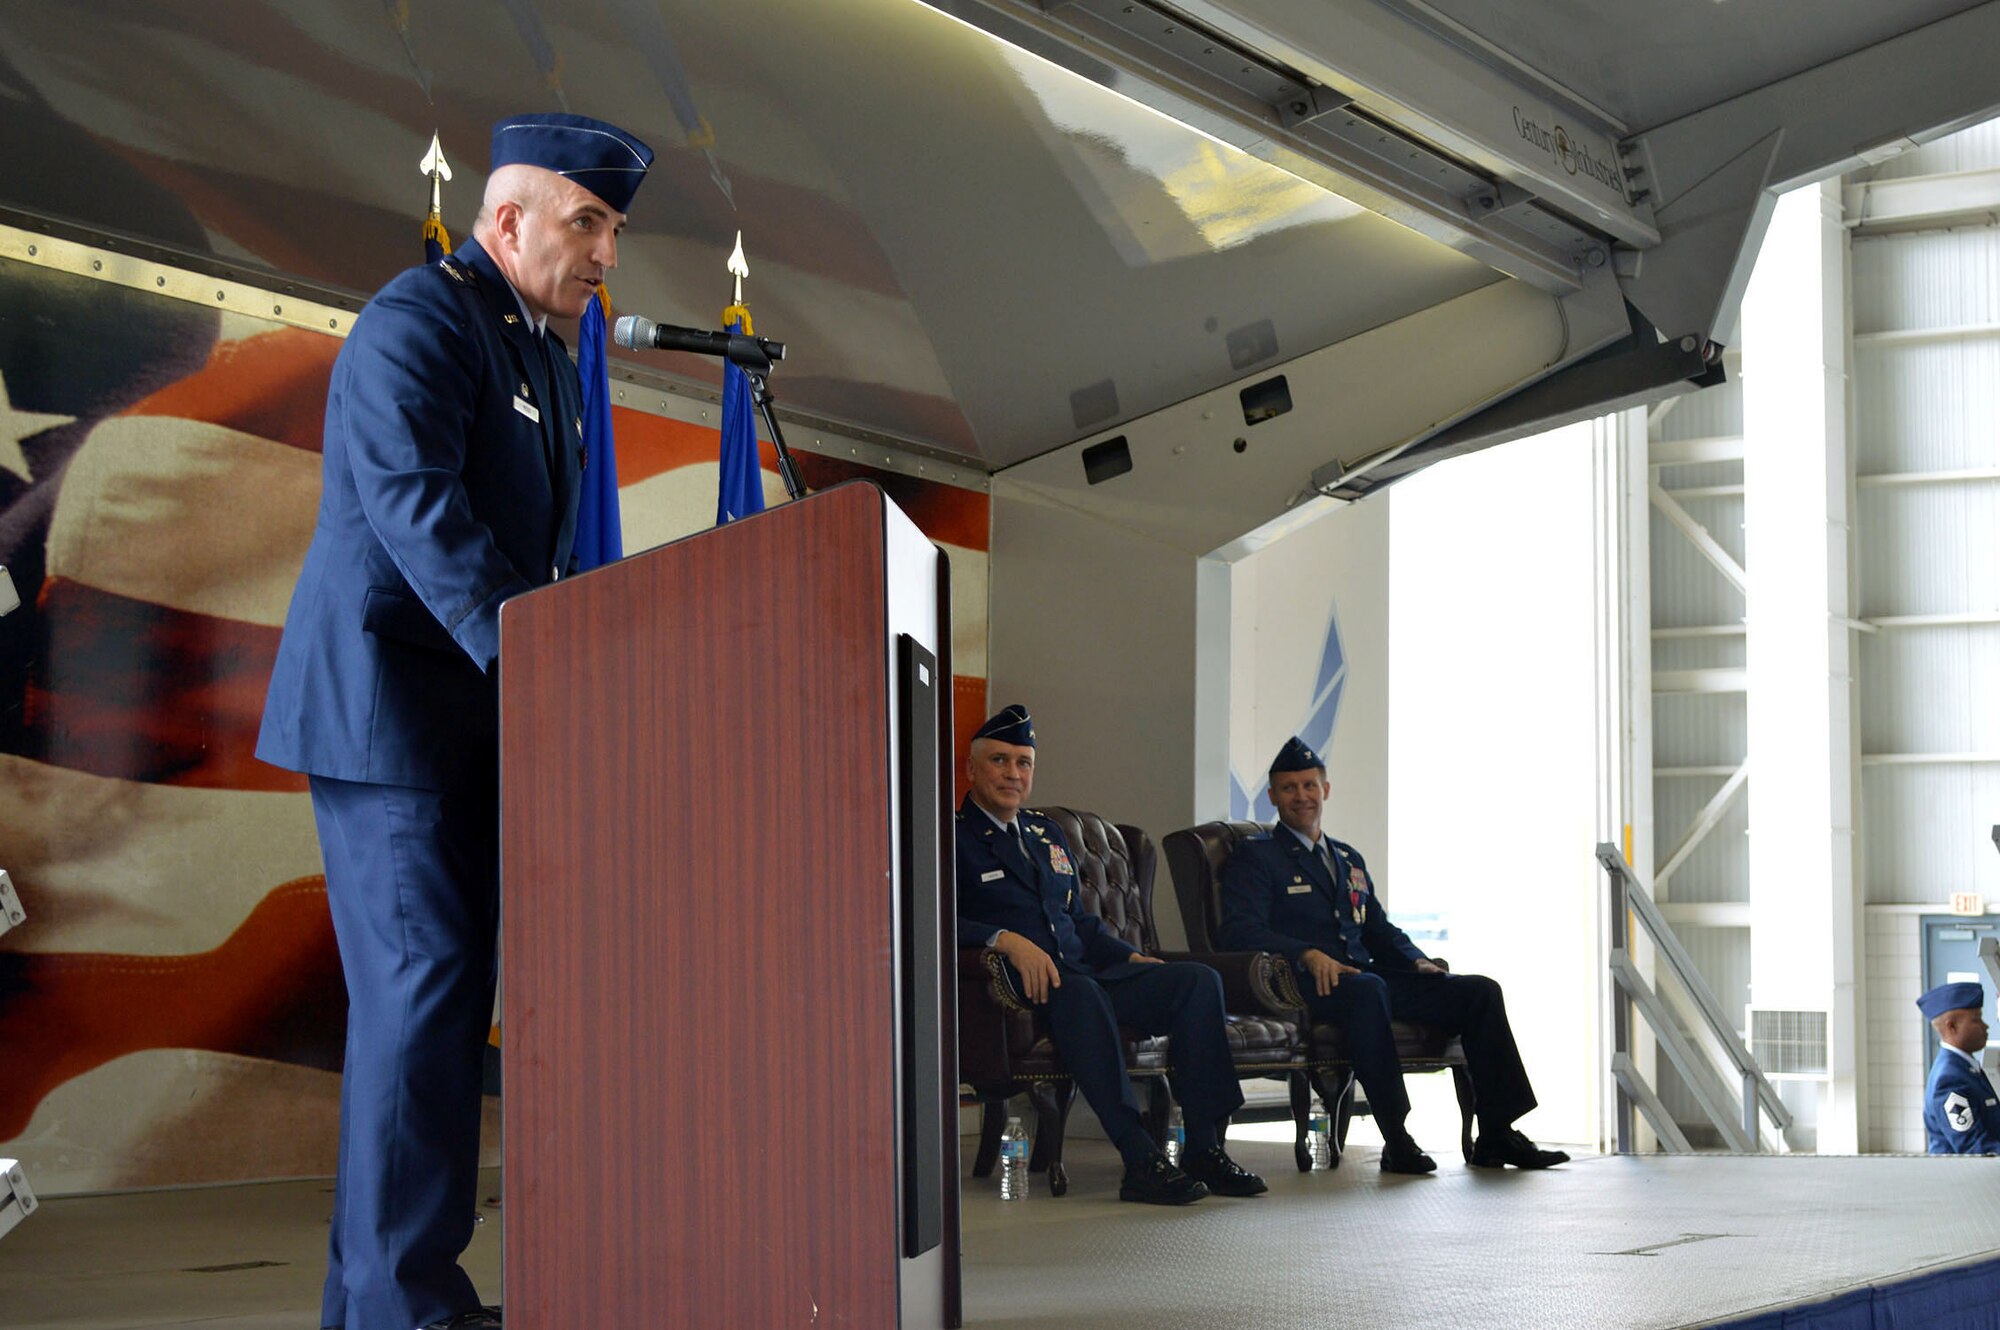 Col. Kenneth E. Moss, 43rd Airlift Group commander, gives his first speech as the new commander during a change of command ceremony August 5, 2014 at Pope Army Airfield, N.C. Prior to his current assignment, Moss was a fellow at the U.S. Navy Strategic Studies Group, in Newport, R.I. The outgoing commander, Col. Daniel H. Tulley, moves on to his next assignment as the commander for the 6th Air Mobility Wing, MacDill Air Force Base, Fla. (U.S. Air Force photo/Marvin Krause)